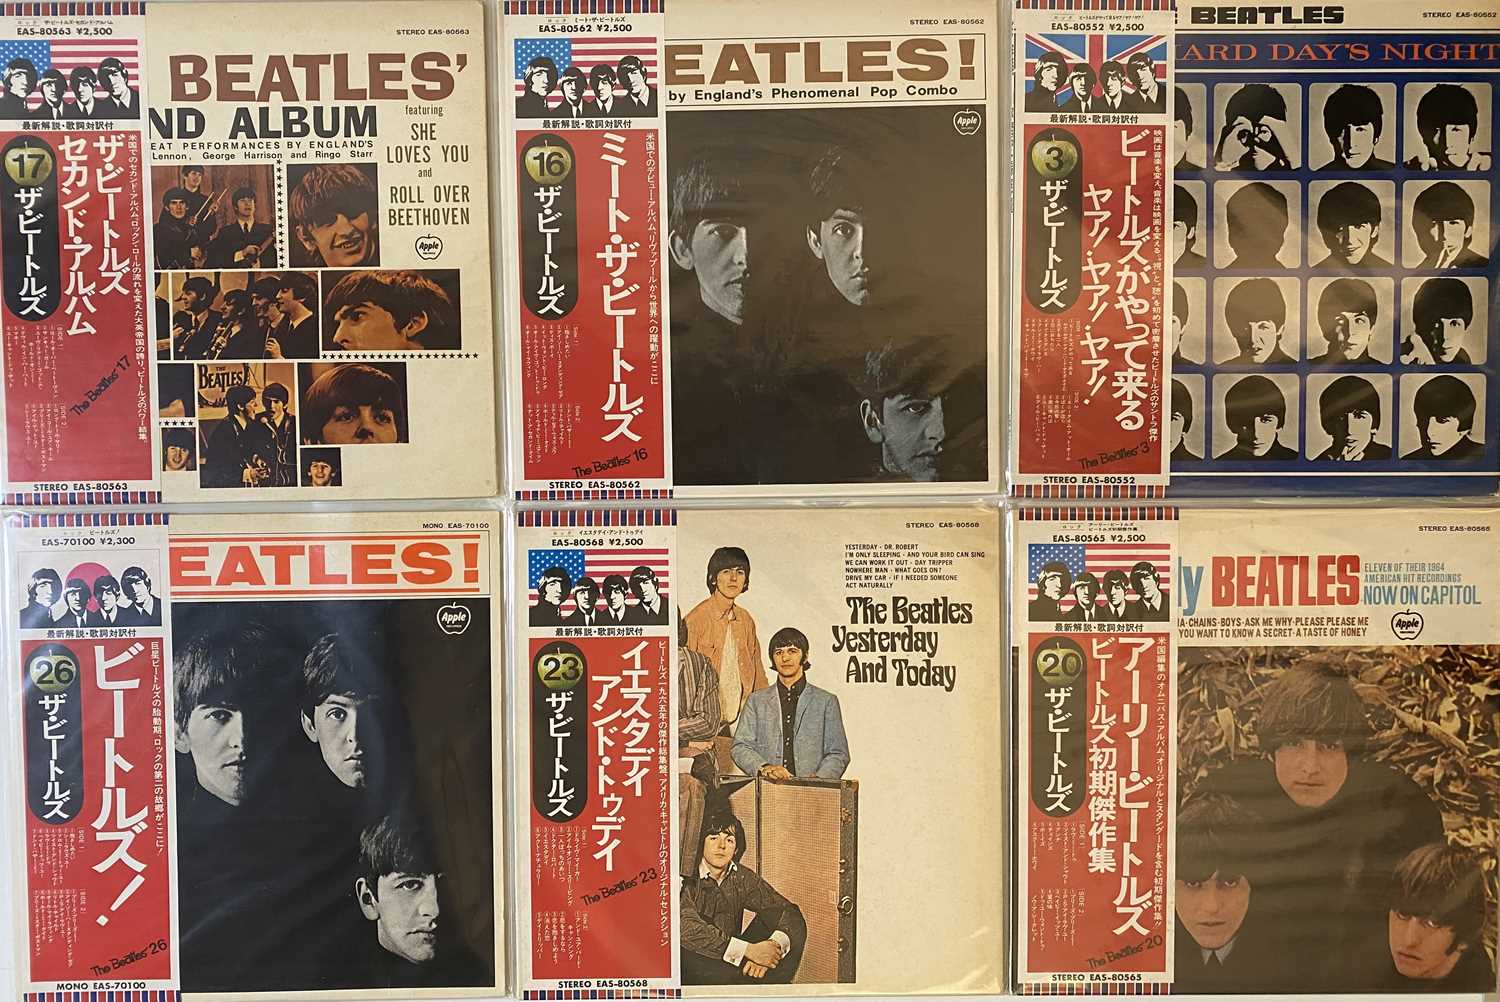 THE BEATLES - JAPANESE PRESSING LPs (1970s/1980s)